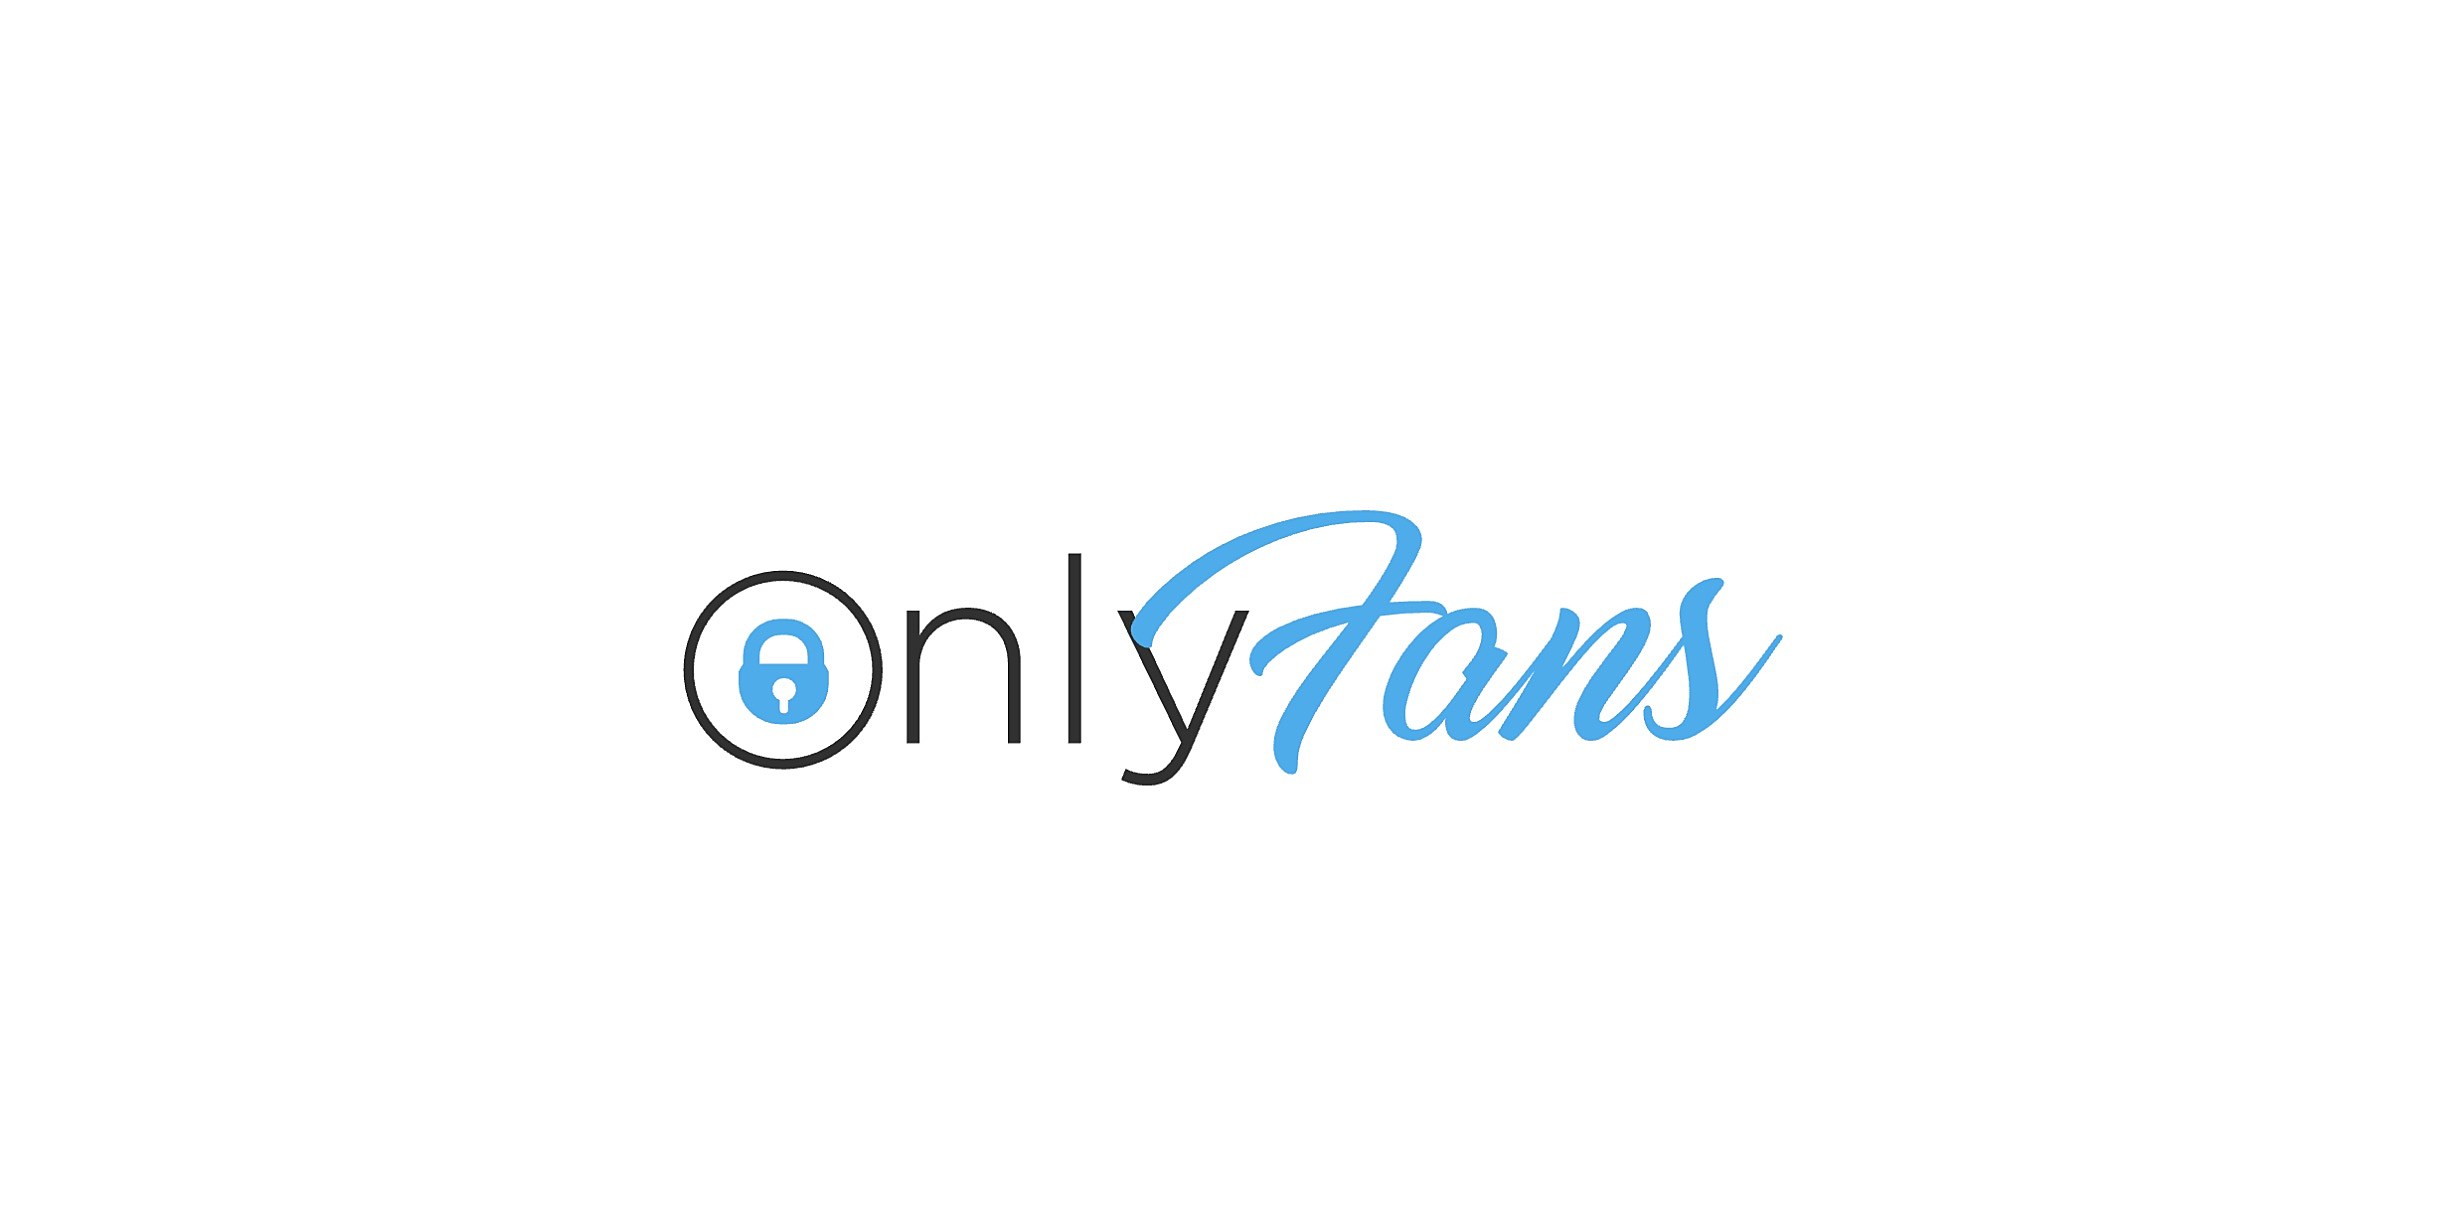 St louis onlyfans